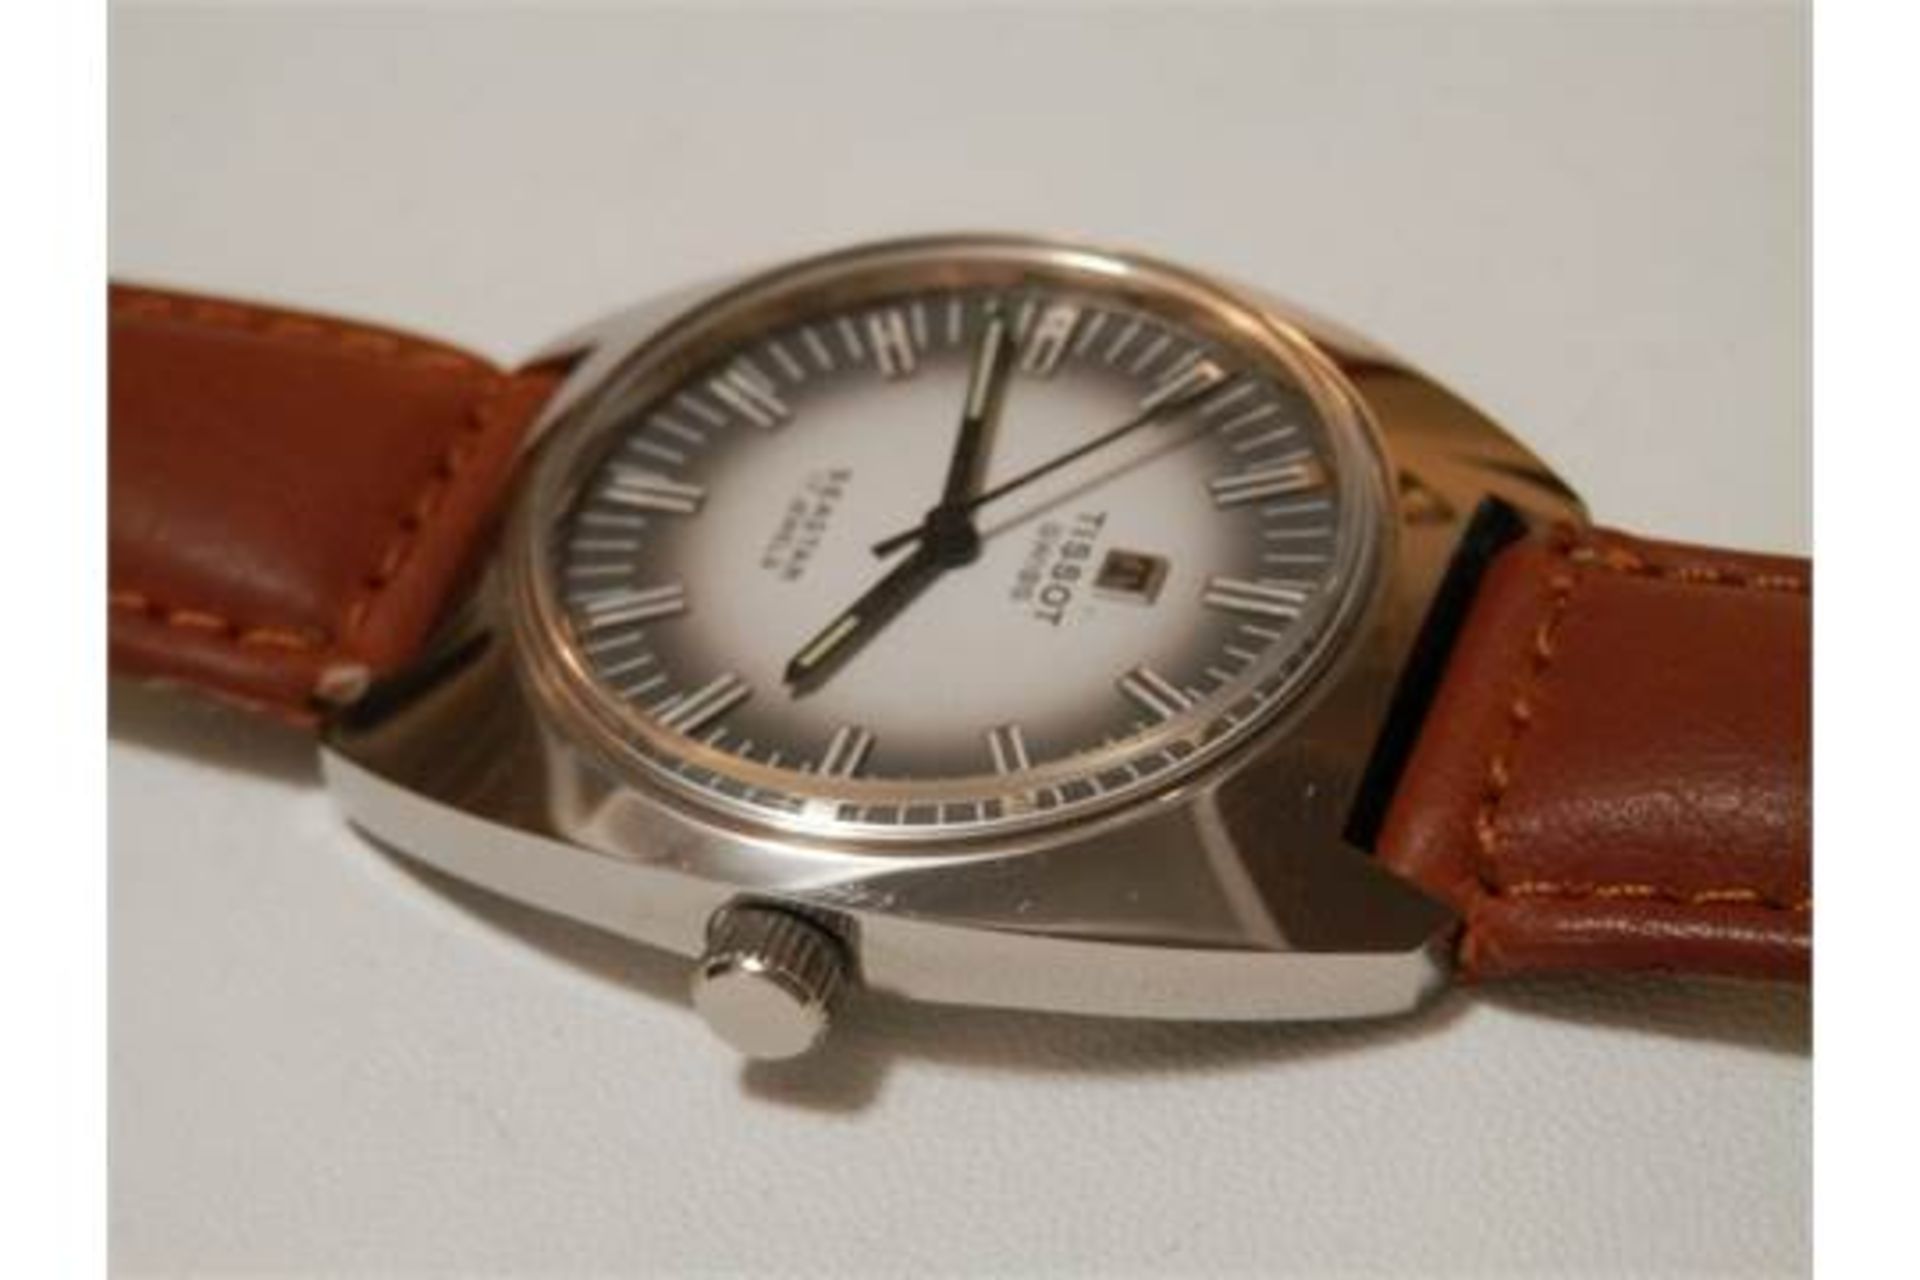 SUPERB GENTS TISSOT SEASTAR, POSSIBLY NEW/OLD STOCK 1970S 17 JEWEL SWISS WATCH (#3 of 3 available) - Image 9 of 10